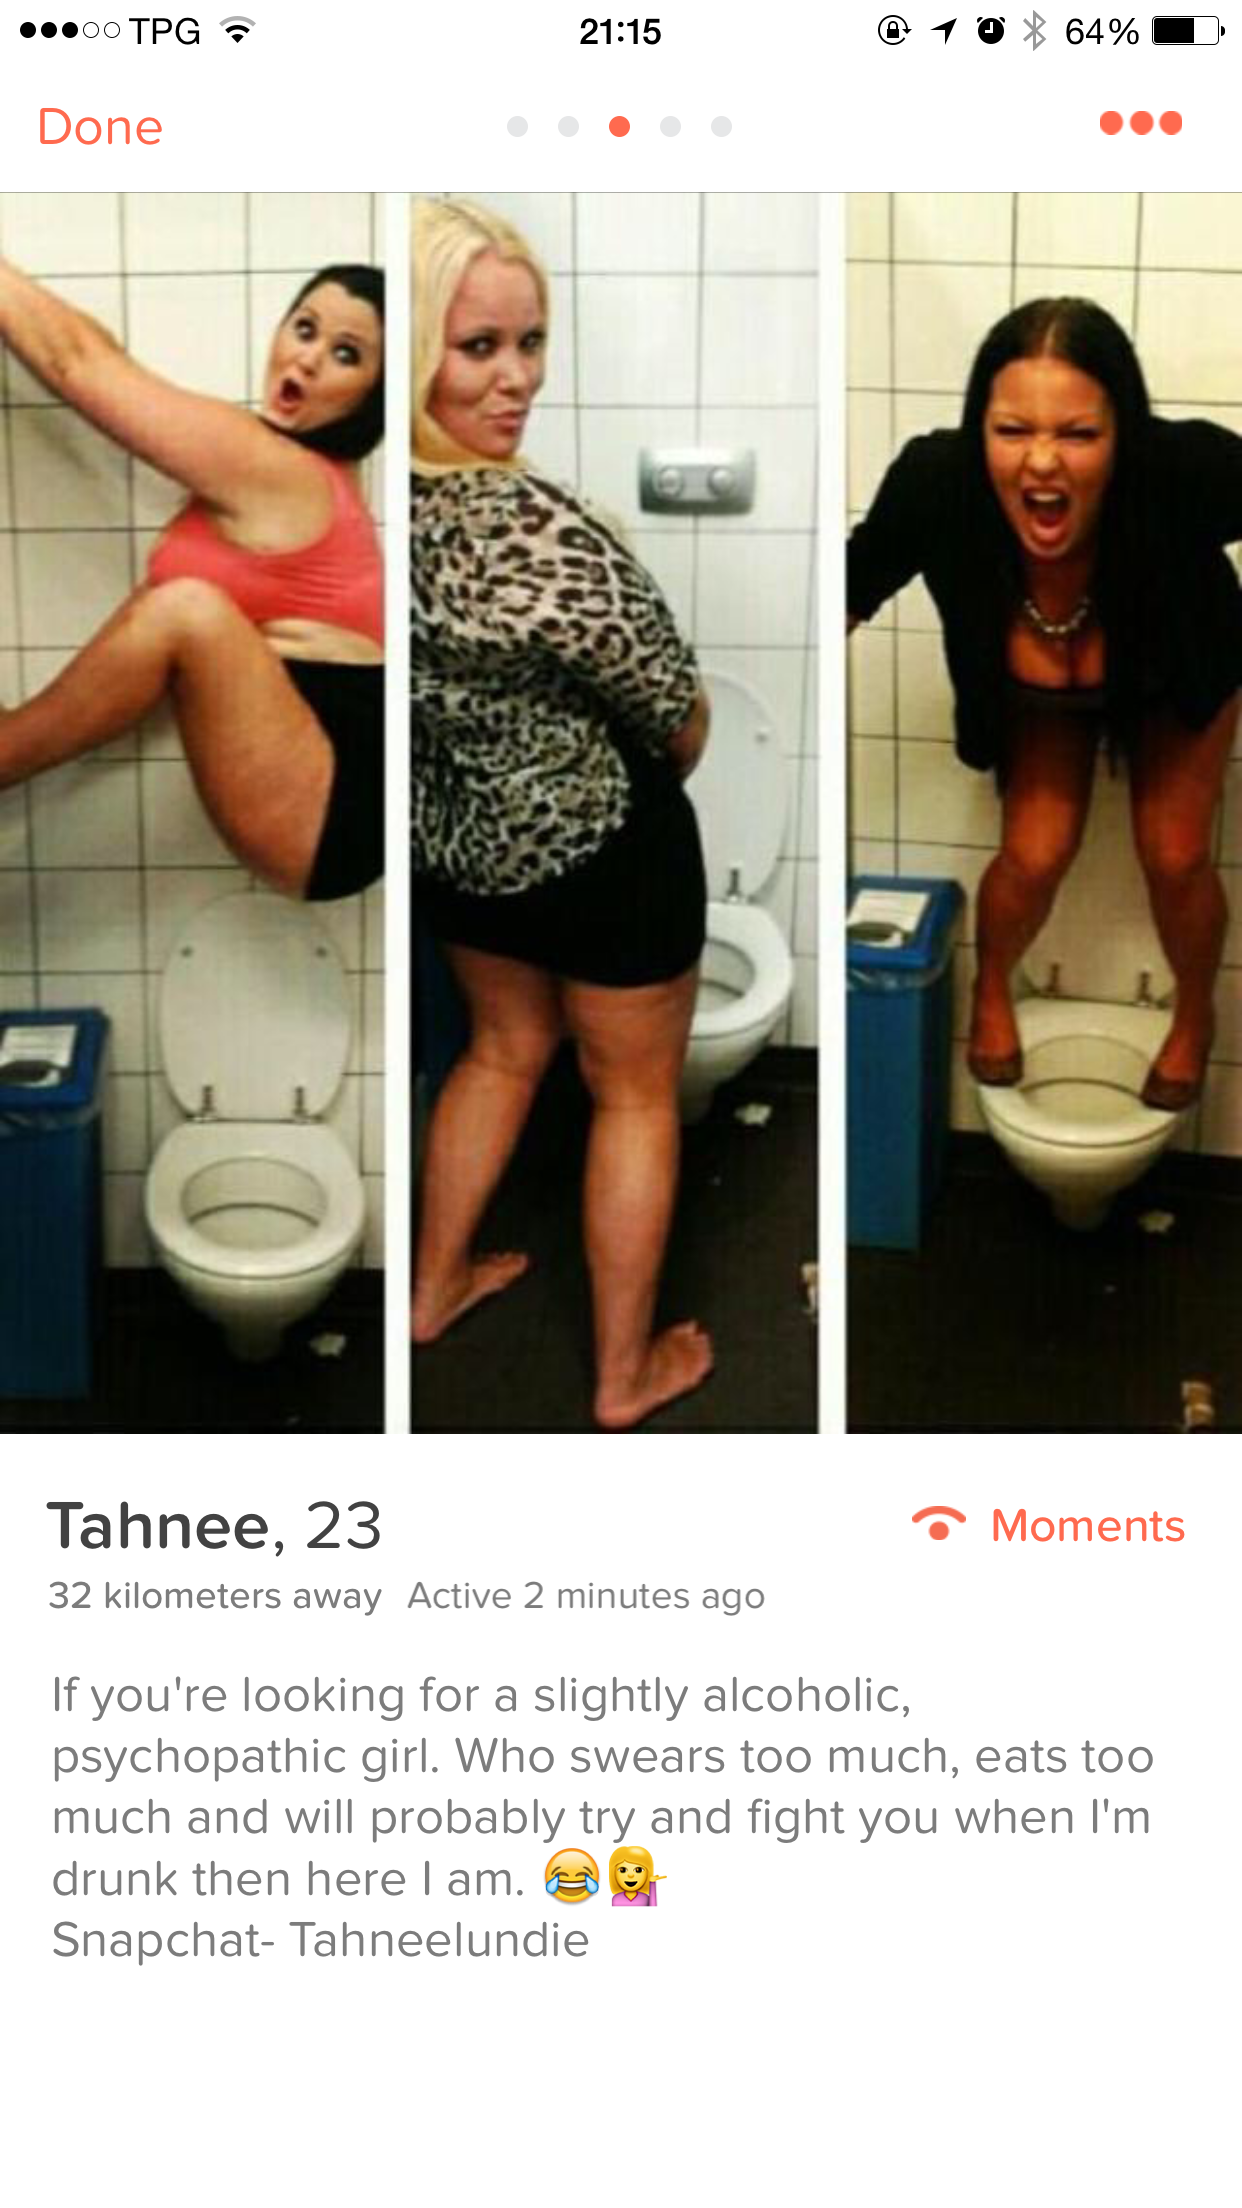 big ass tinder girls - Tpg 1064% Done Moments Tahnee, 23 32 kilometers away Active 2 minutes ago If you're looking for a slightly alcoholic, psychopathic girl. Who swears too much, eats too much and will probably try and fight you when I'm drunk then here